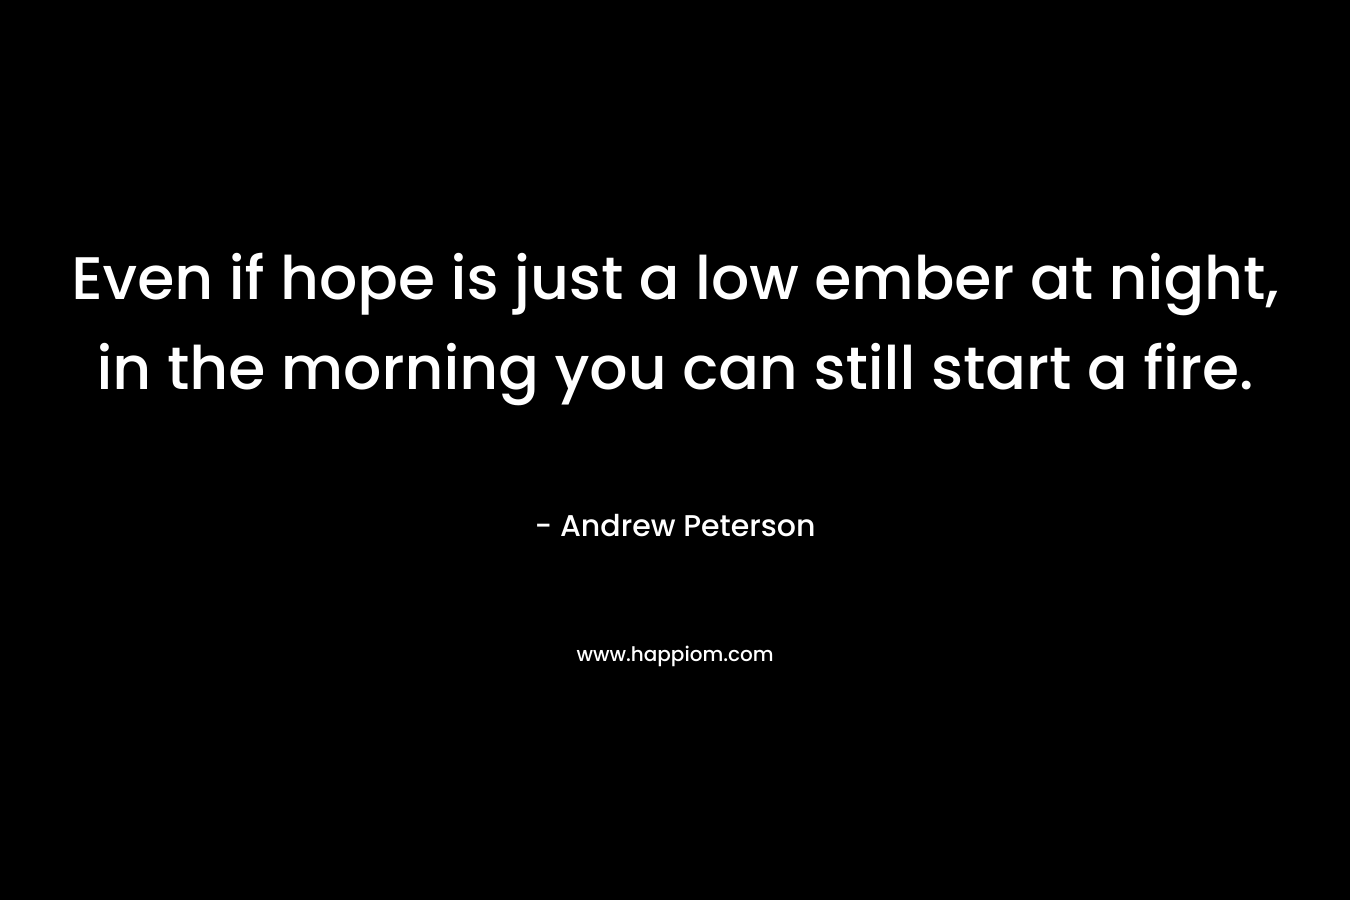 Even if hope is just a low ember at night, in the morning you can still start a fire.